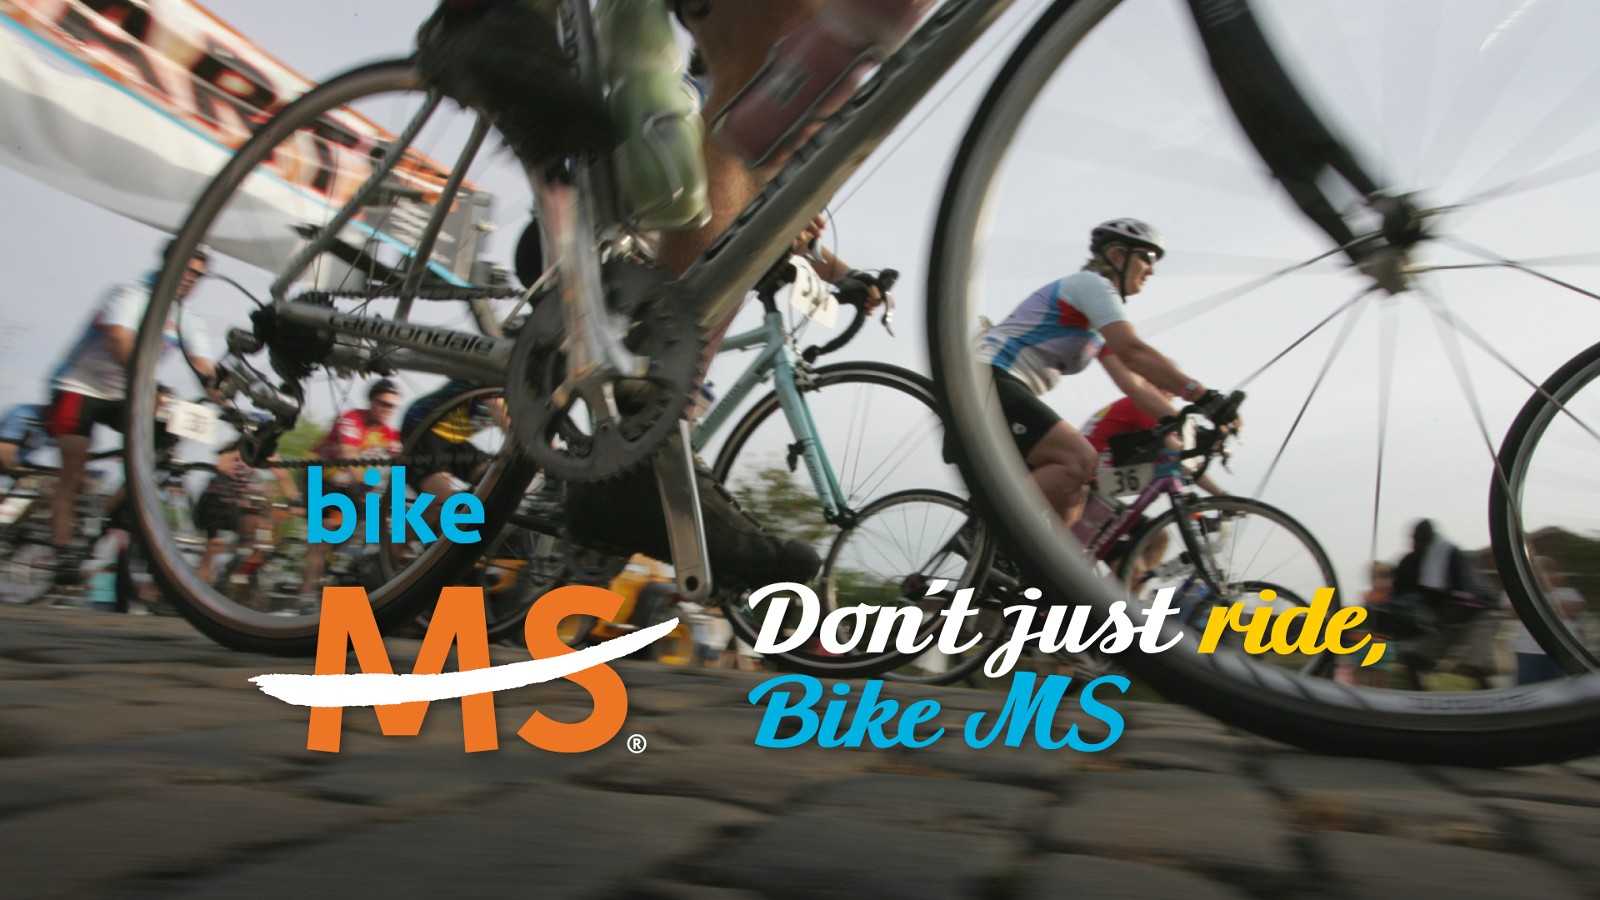 Facebook cover image depicting a blurred close-up of a bike